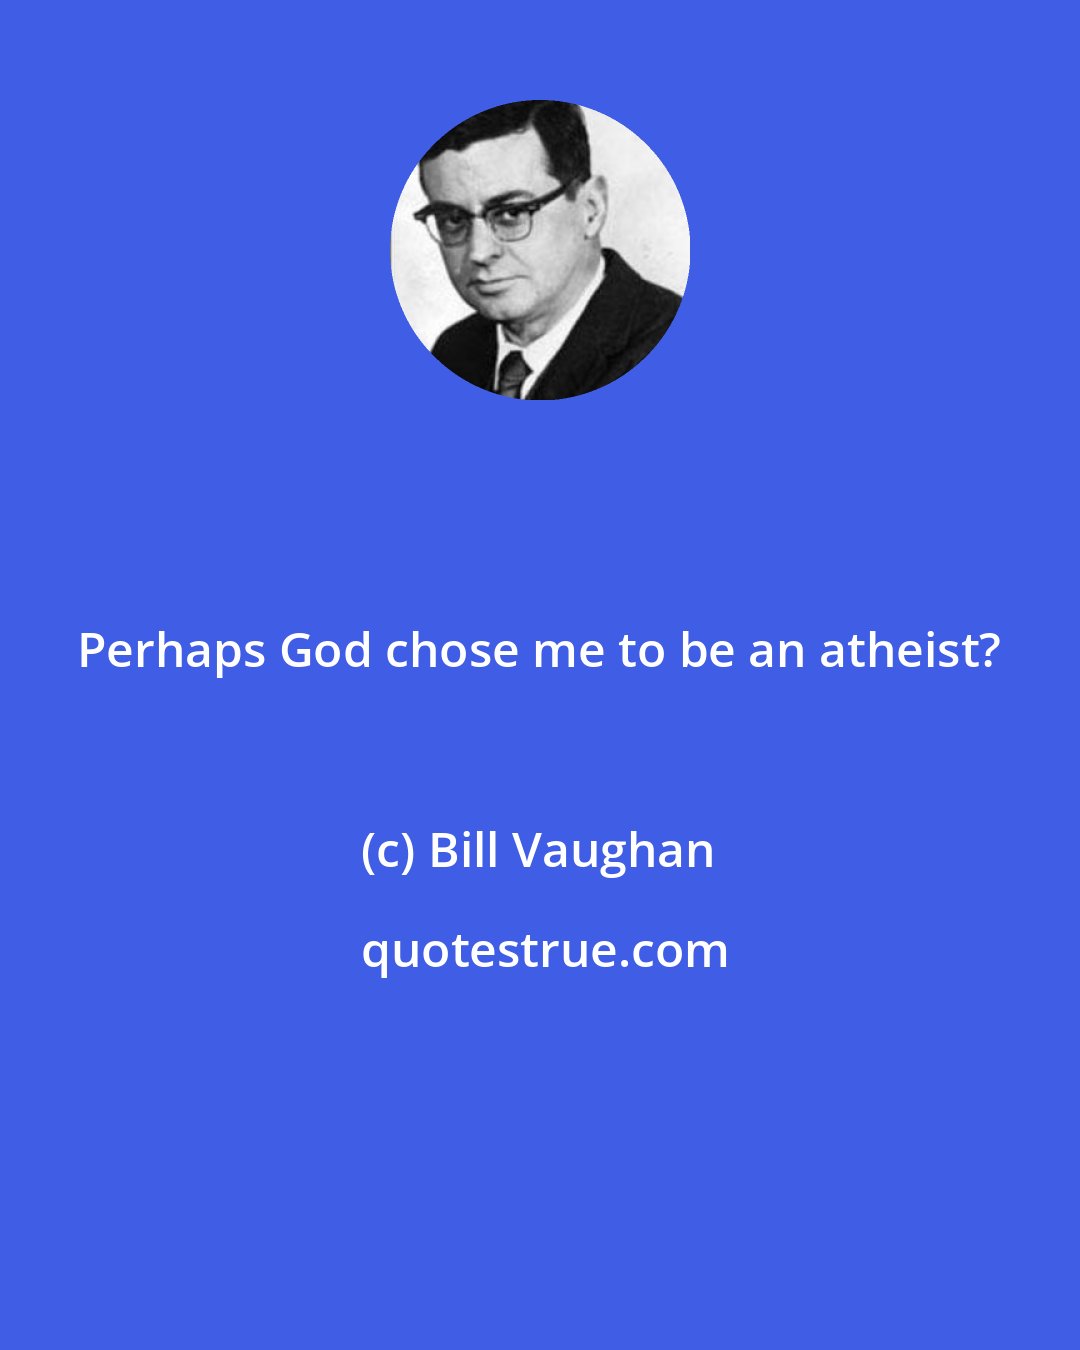 Bill Vaughan: Perhaps God chose me to be an atheist?